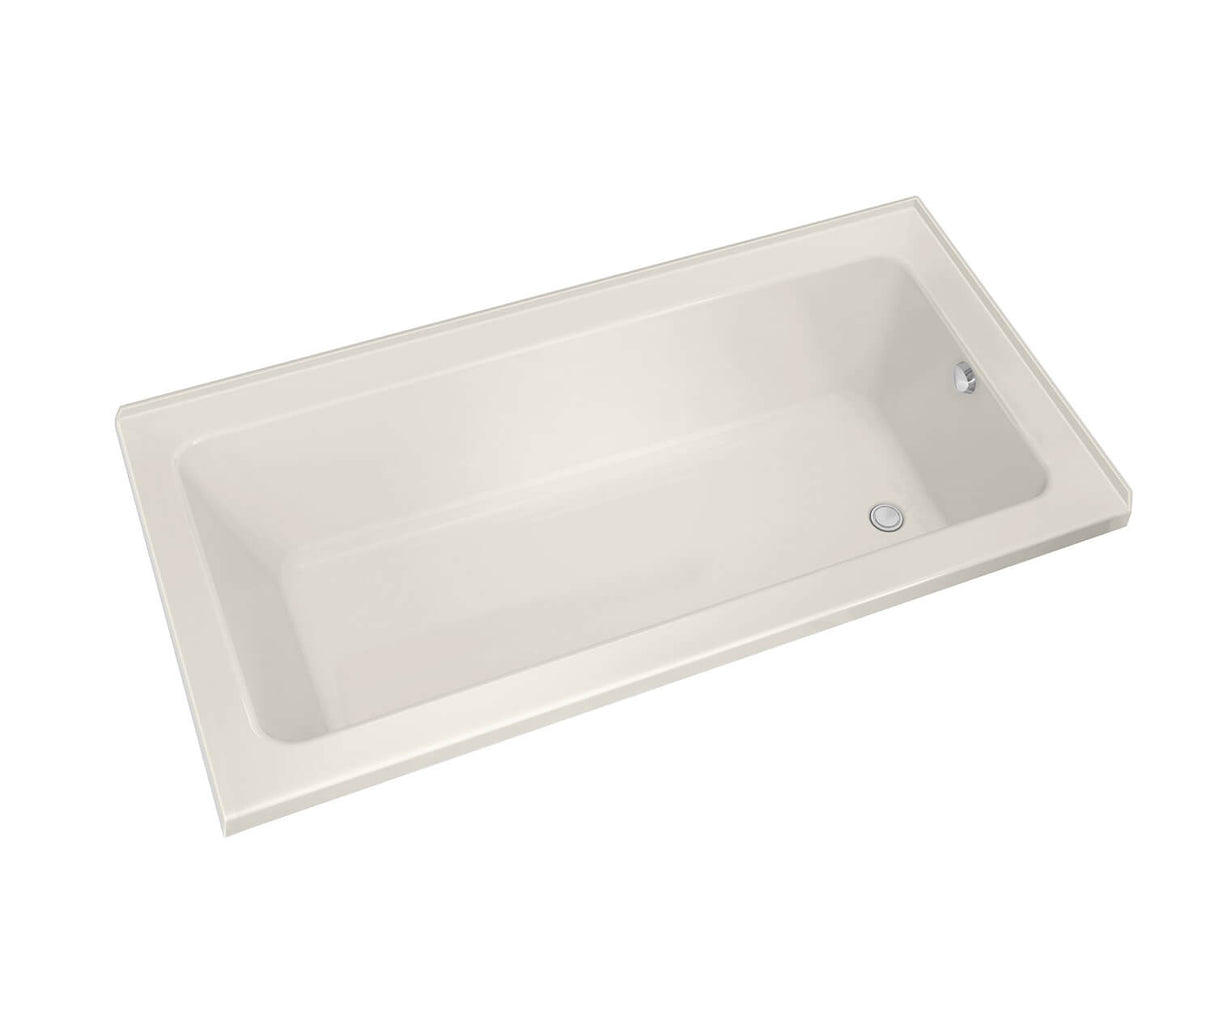 MAAX 106209-R-000-007 Pose 6636 IF Acrylic Corner Right Right-Hand Drain Bathtub in Biscuit